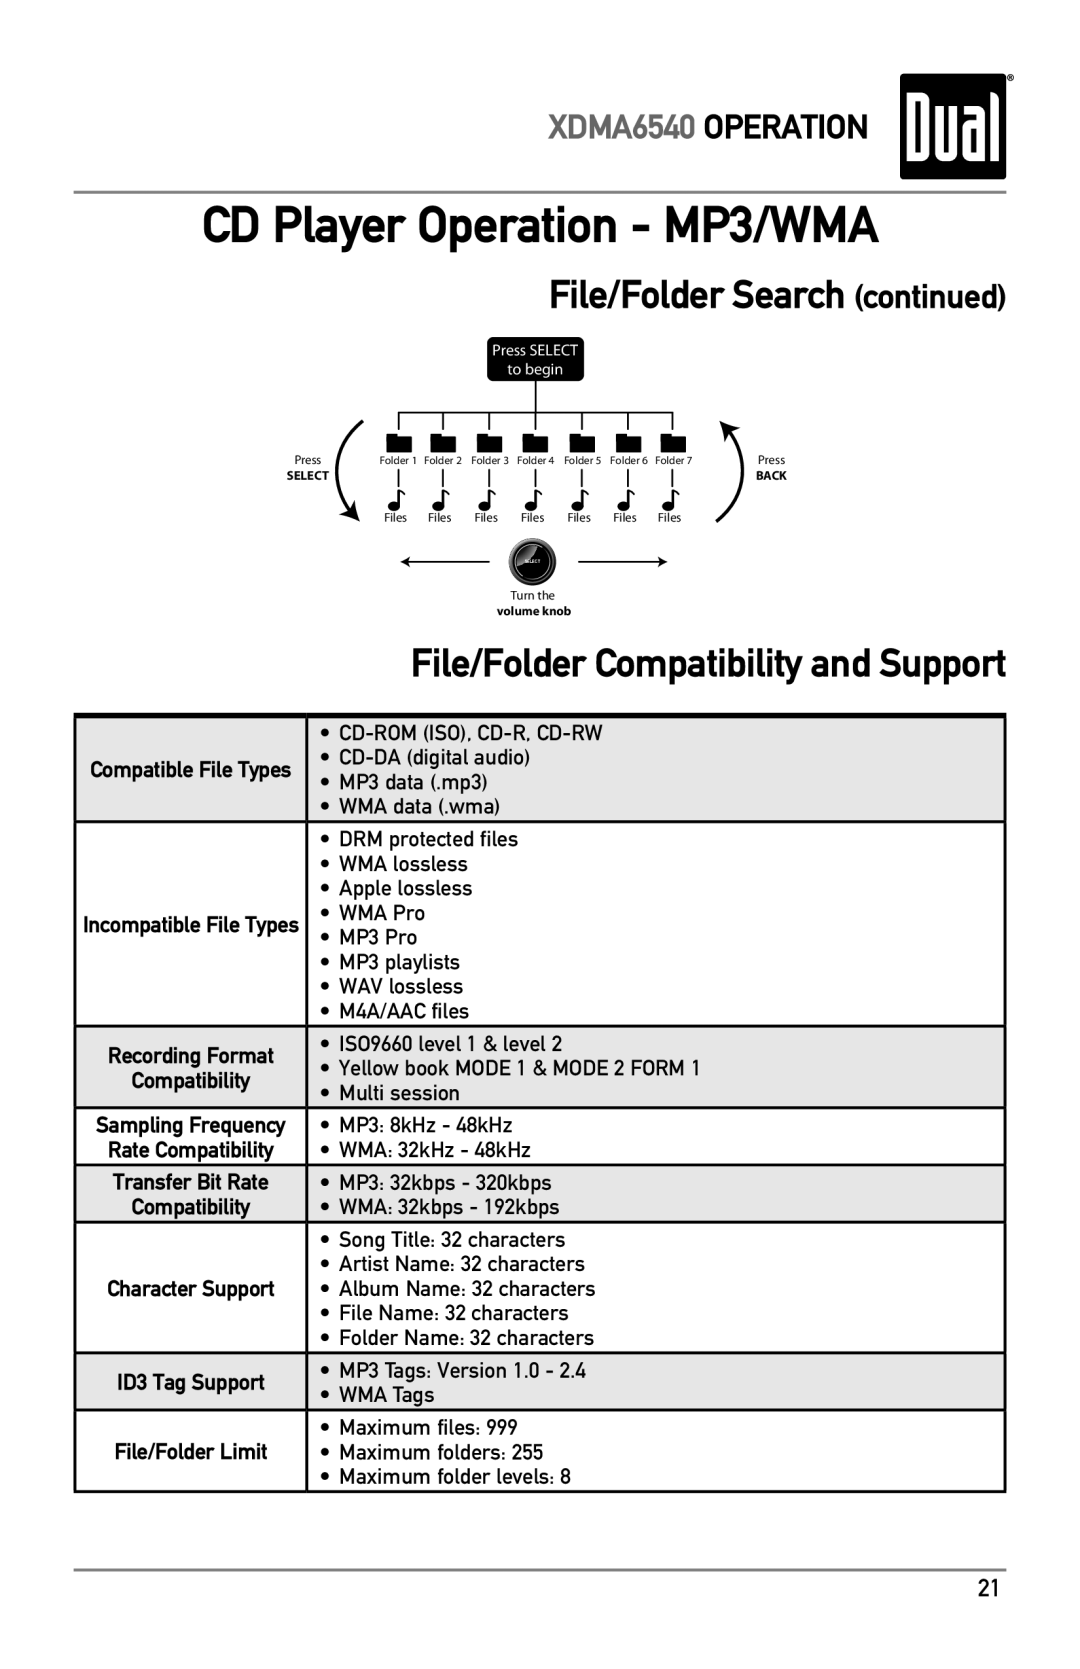 Dual XDMA6540 File/Folder Search continued, File/Folder Compatibility and Support, CD Player Operation - MP3/WMA 